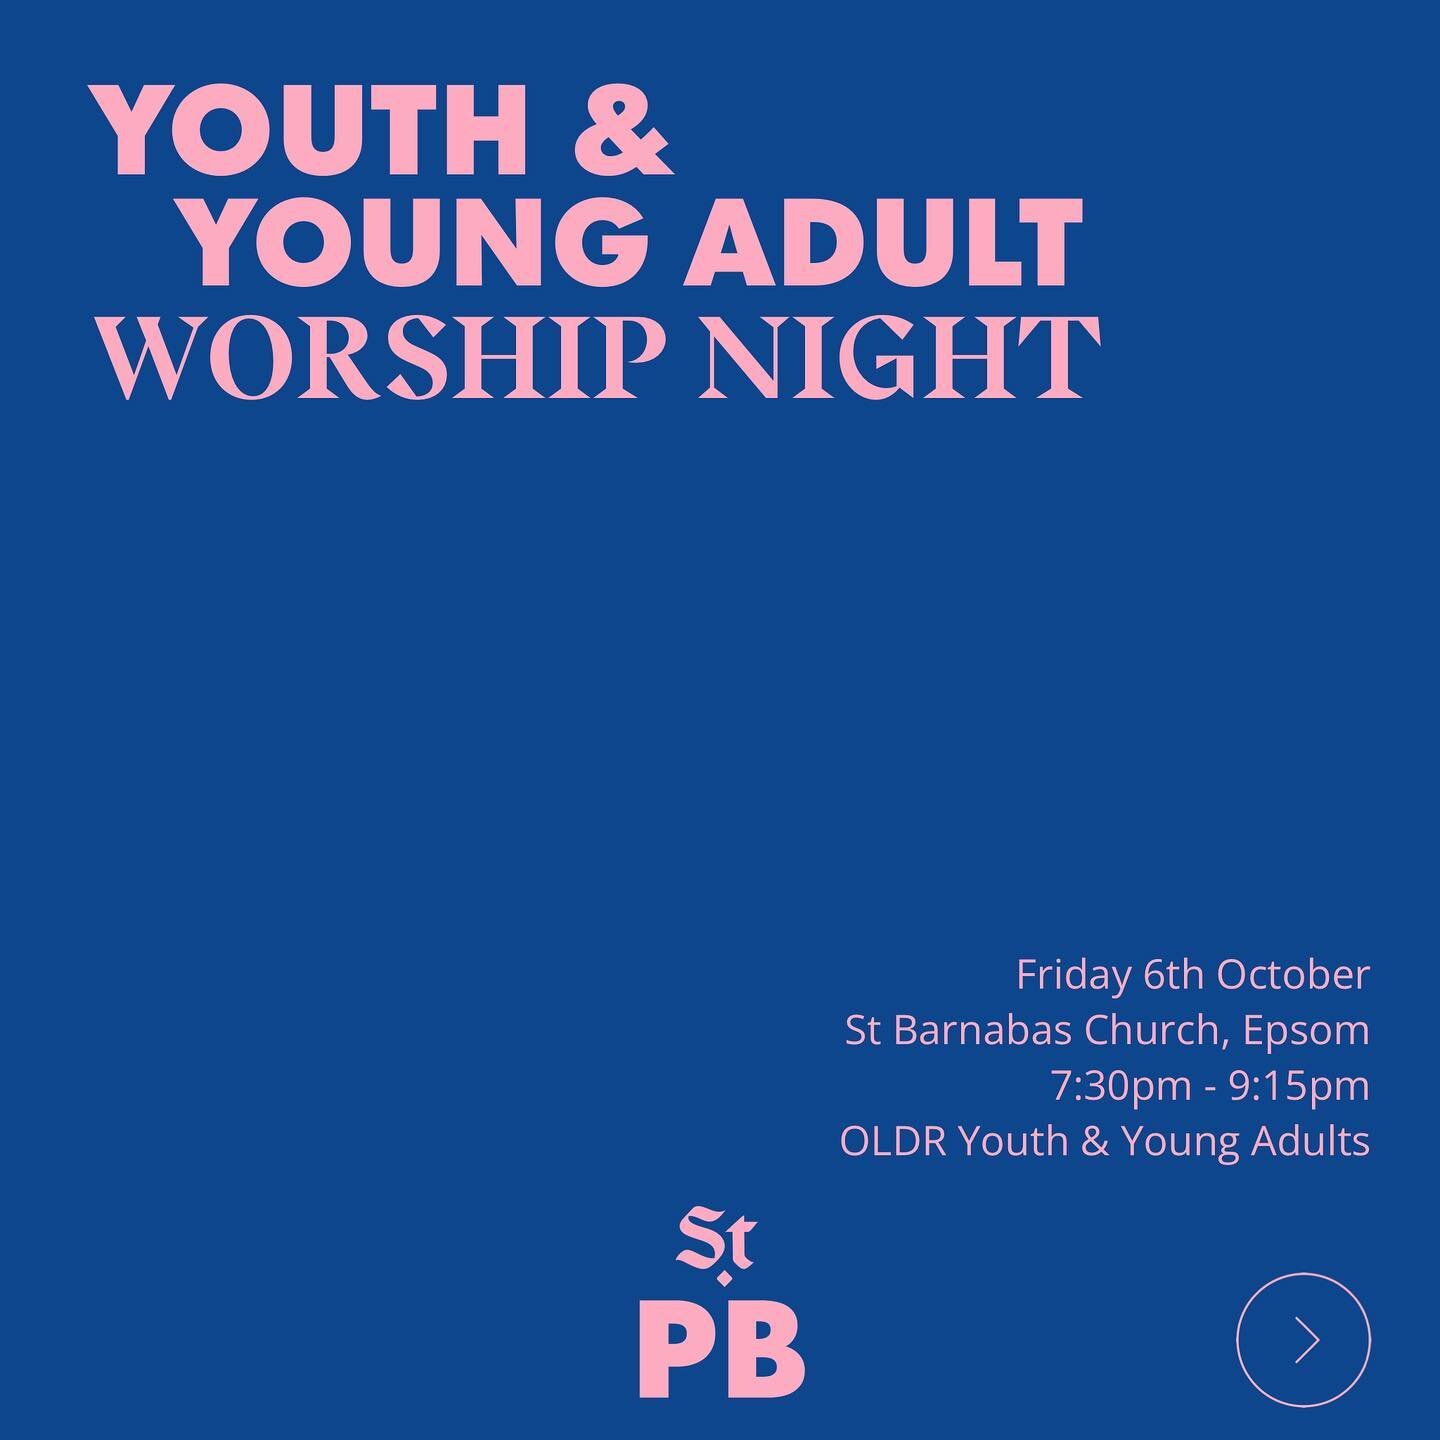 Super excited to gather our OLDR Youth &amp; Young Adults and our minster churches for an evening to worship Jesus, be encouraged in the word, pray for one another and our communities. God is doing something special here, you don&rsquo;t want to miss